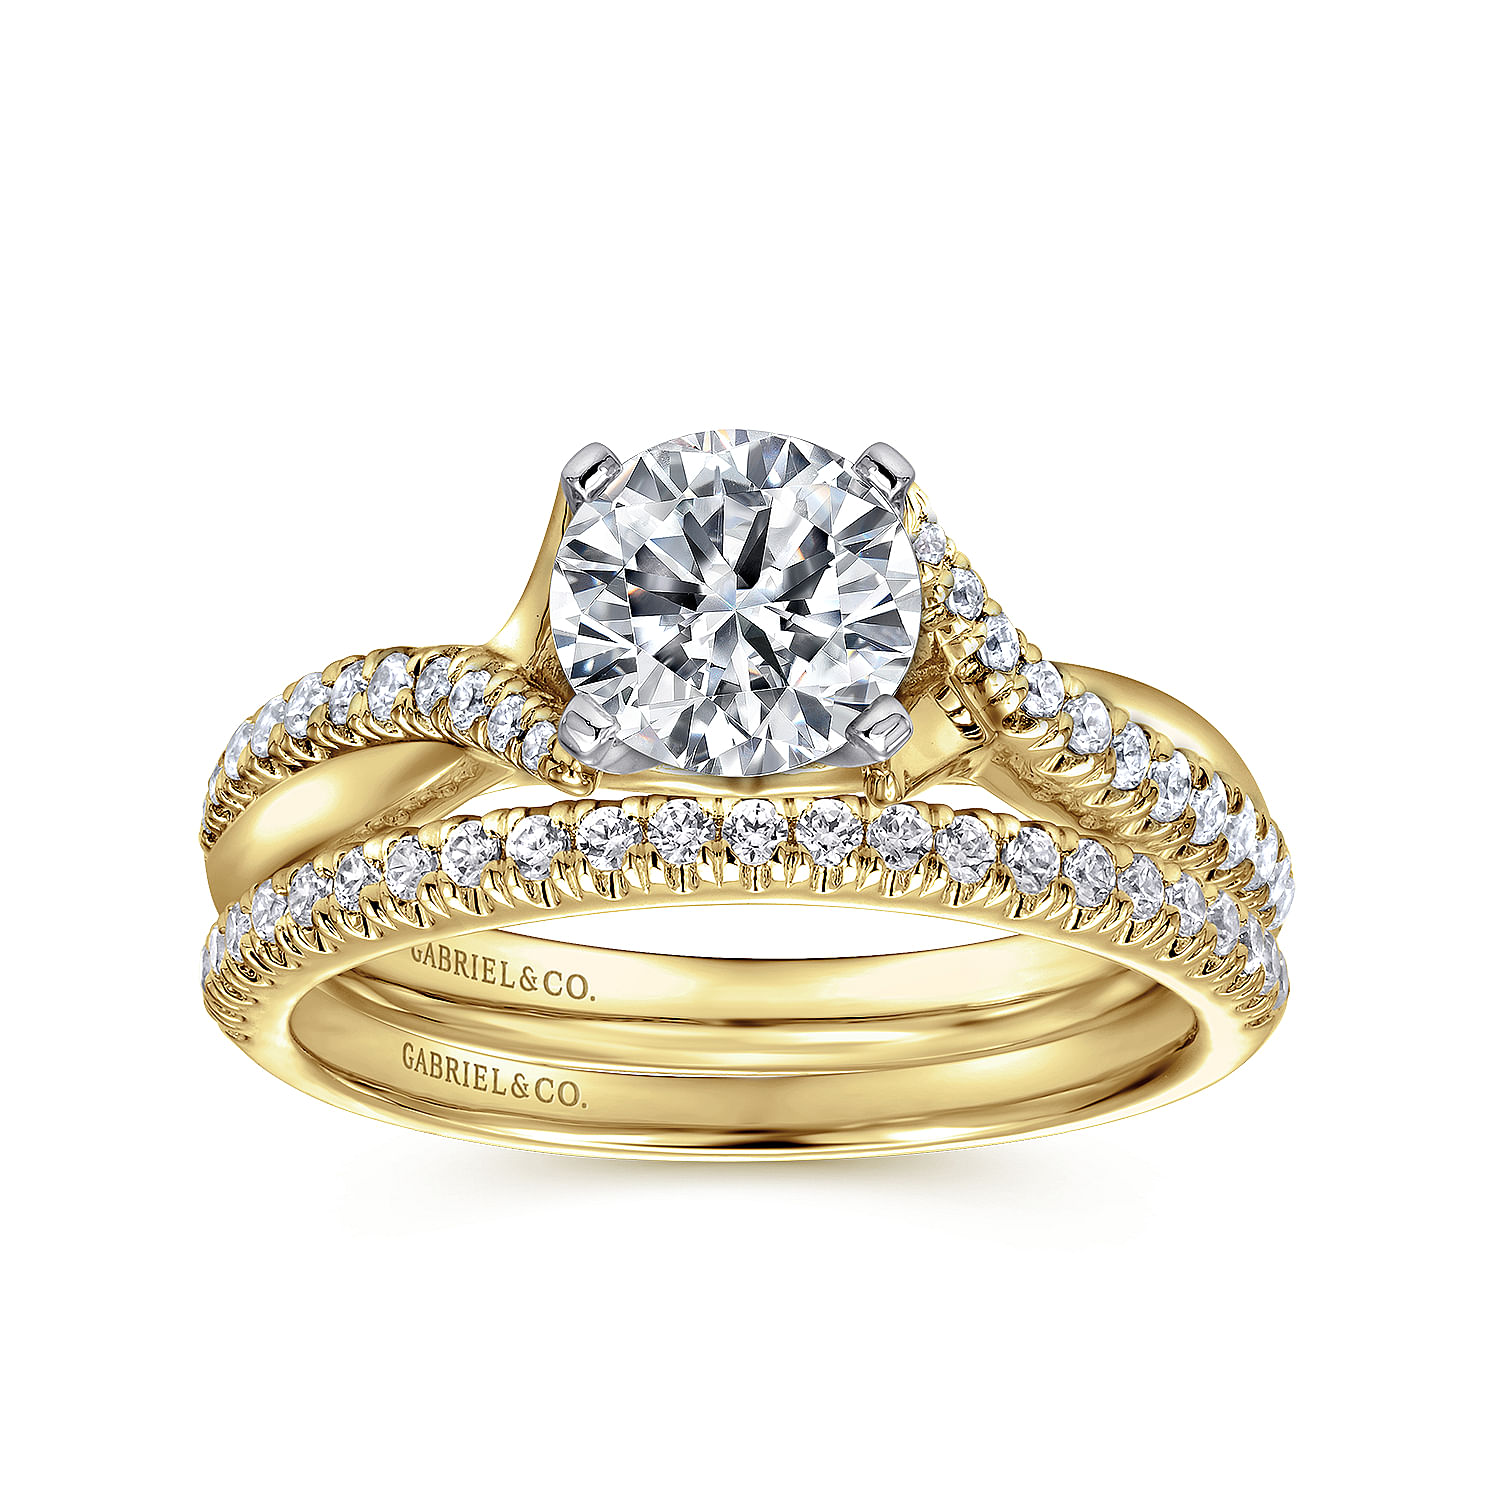 Scout - 14K White-Yellow Gold Round Diamond Twisted Engagement Ring - 0.18 ct - Shot 4